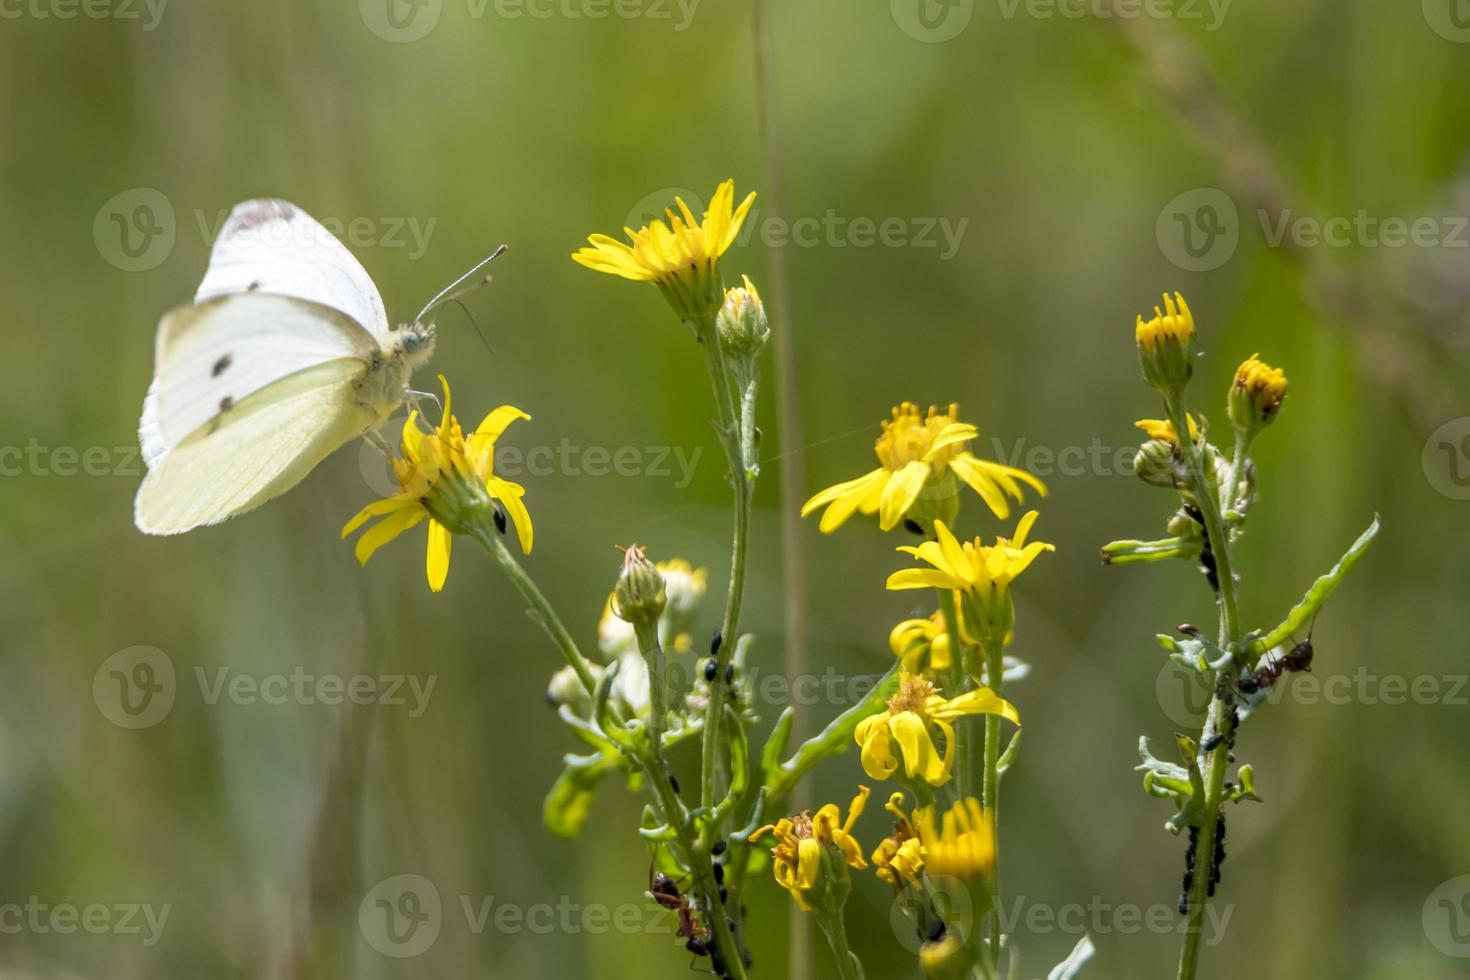 White cabbage butterfly on a yellow blossom photo